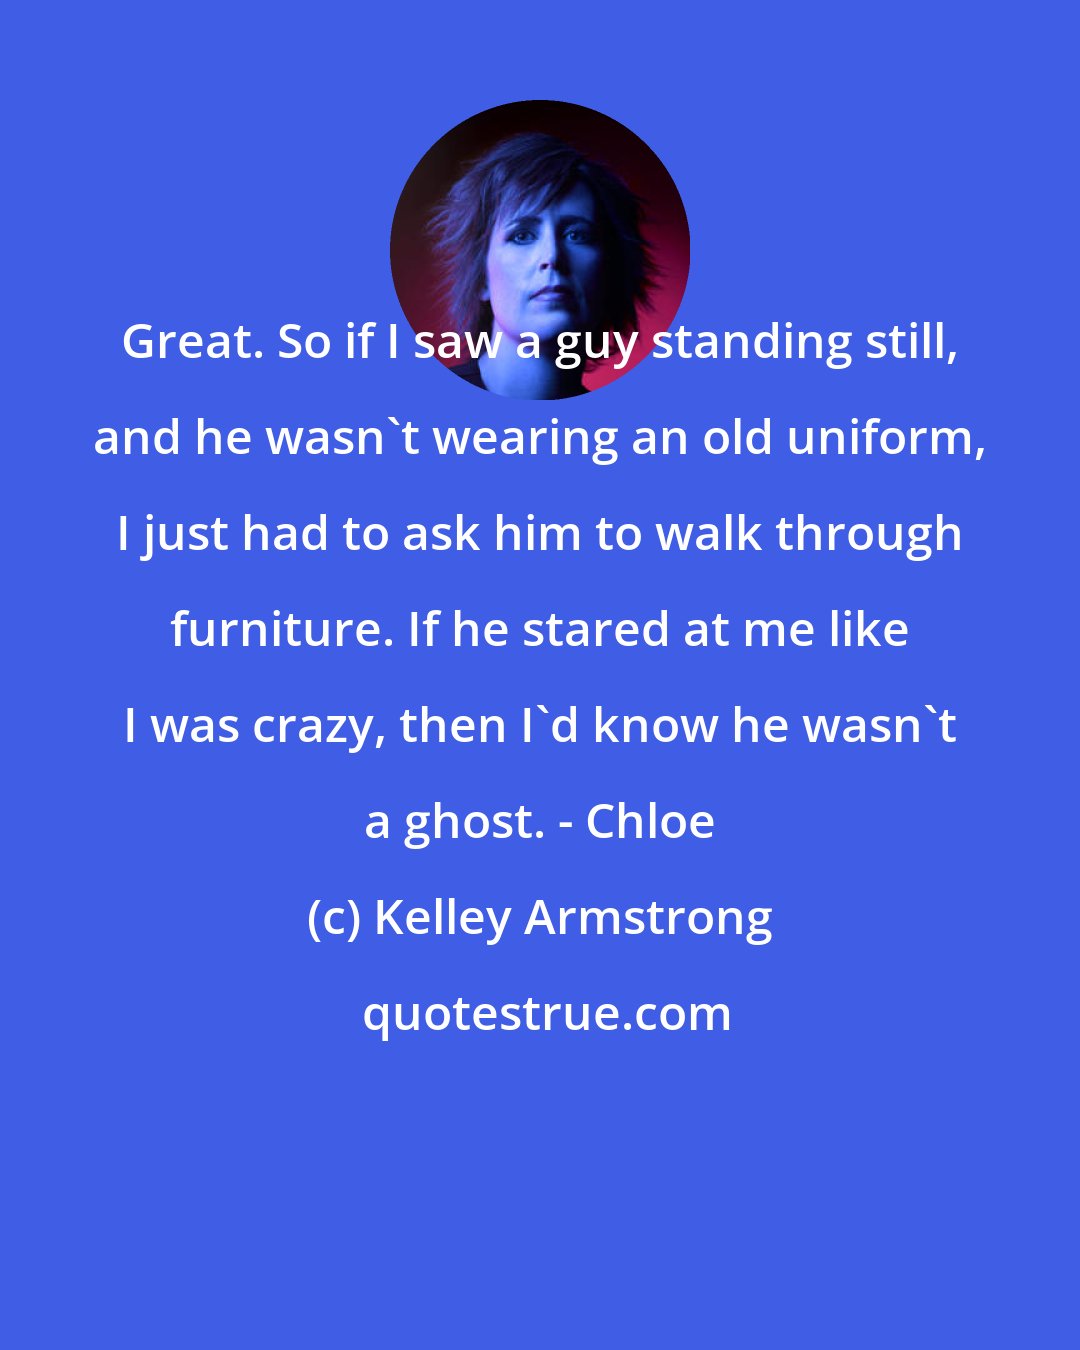 Kelley Armstrong: Great. So if I saw a guy standing still, and he wasn't wearing an old uniform, I just had to ask him to walk through furniture. If he stared at me like I was crazy, then I'd know he wasn't a ghost. - Chloe